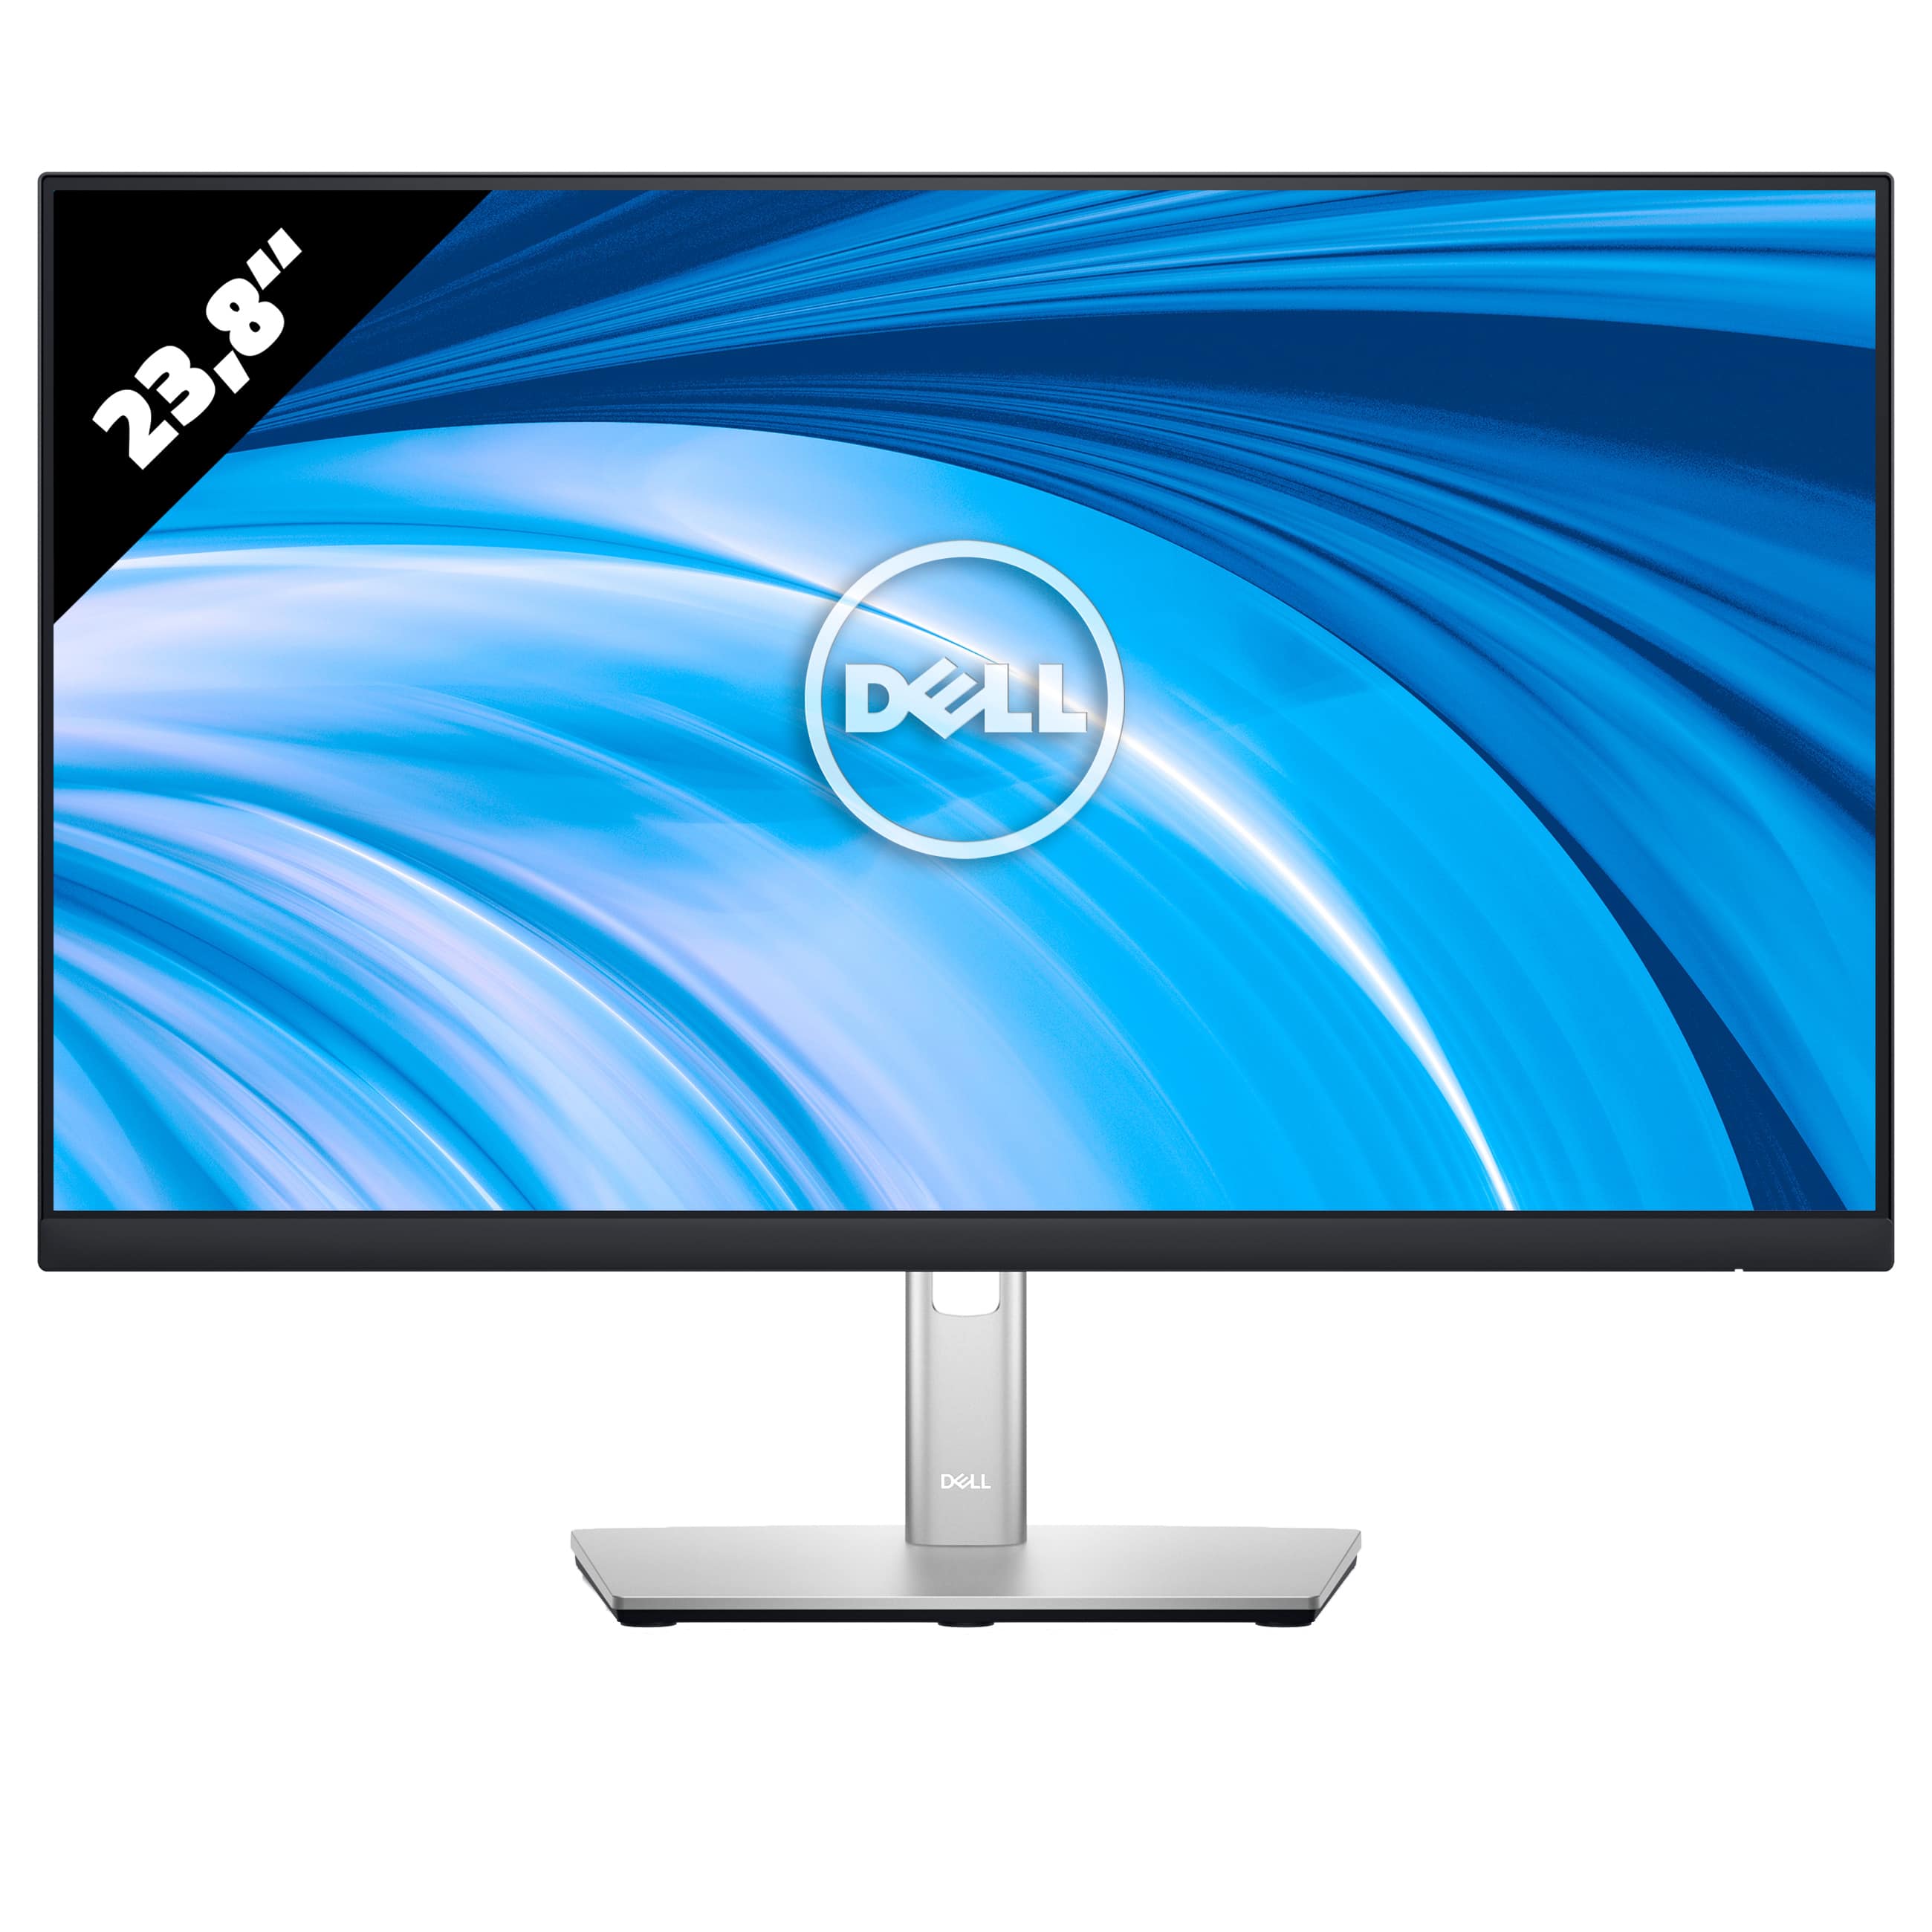 Dell Professional P2422HE - 1920 x 1080 - FHD